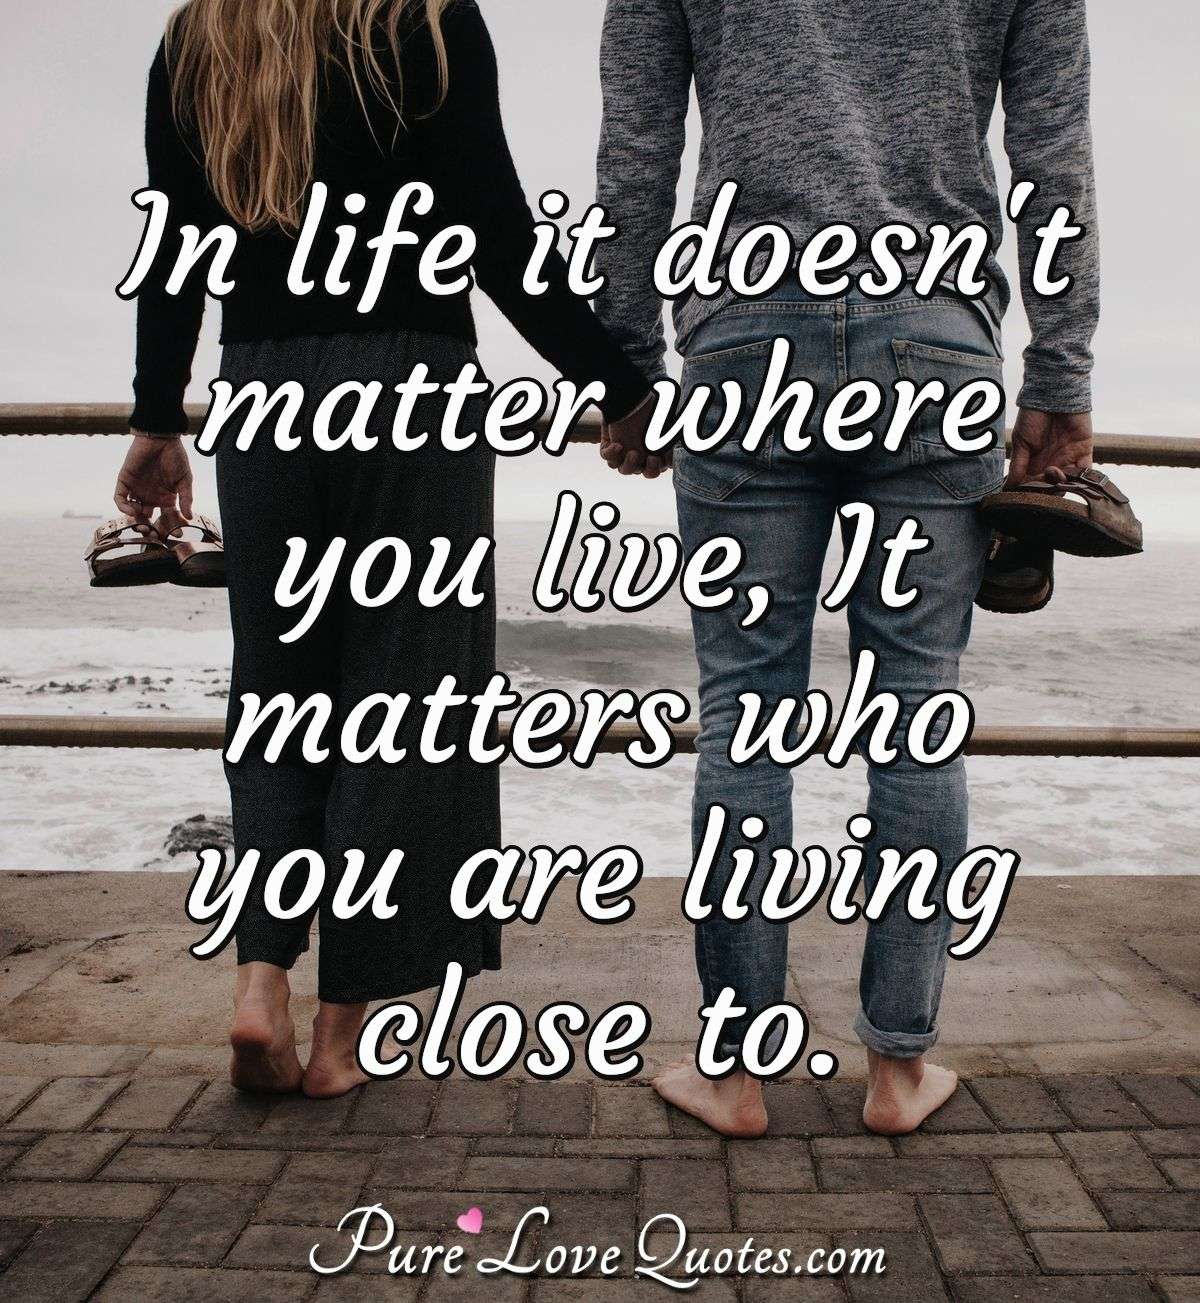 In life it doesn't matter where you live, It matters who you are living close to. - Anonymous